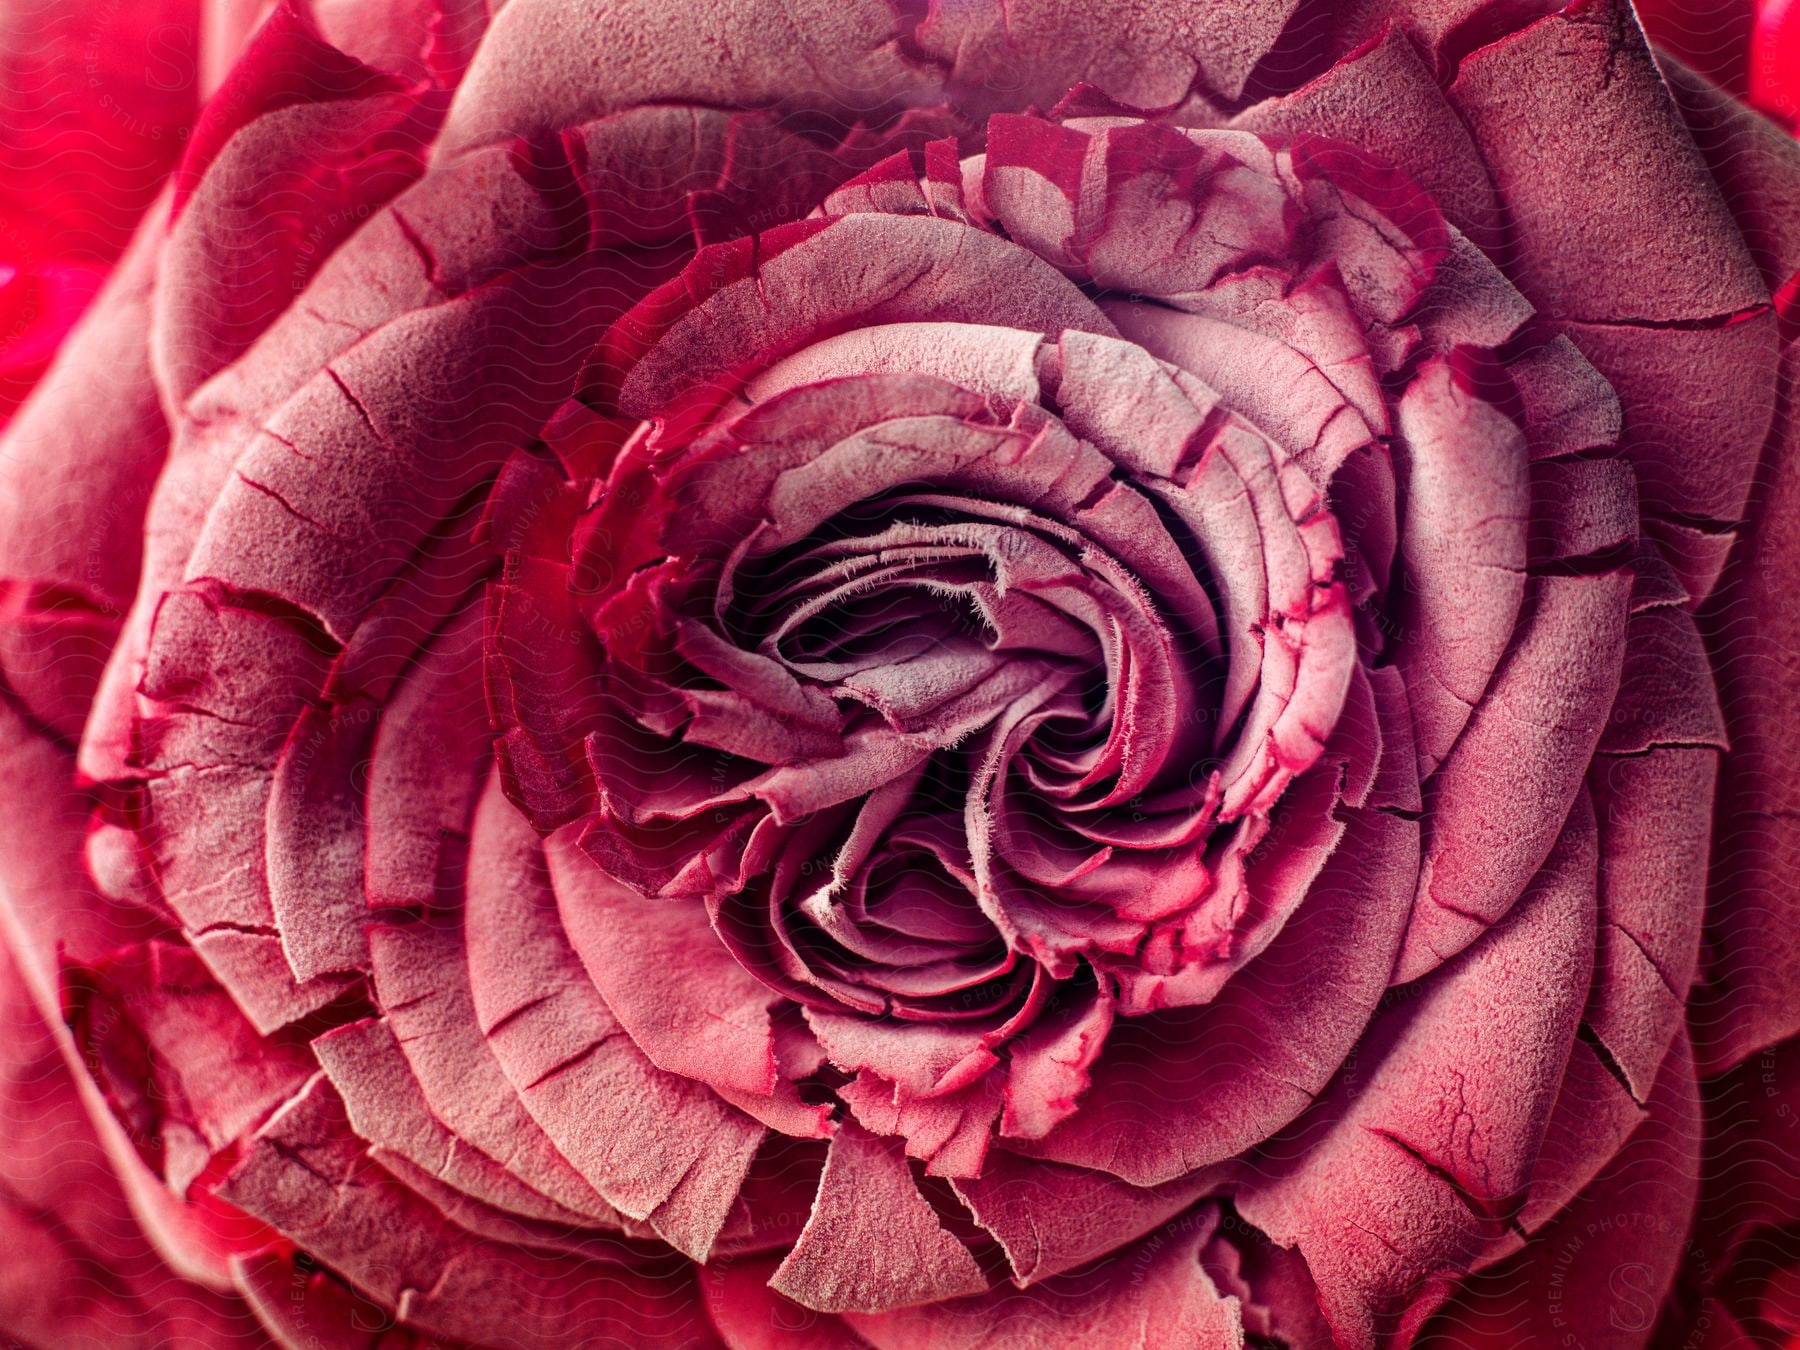 A closeup view of a pinkred rose flower from above